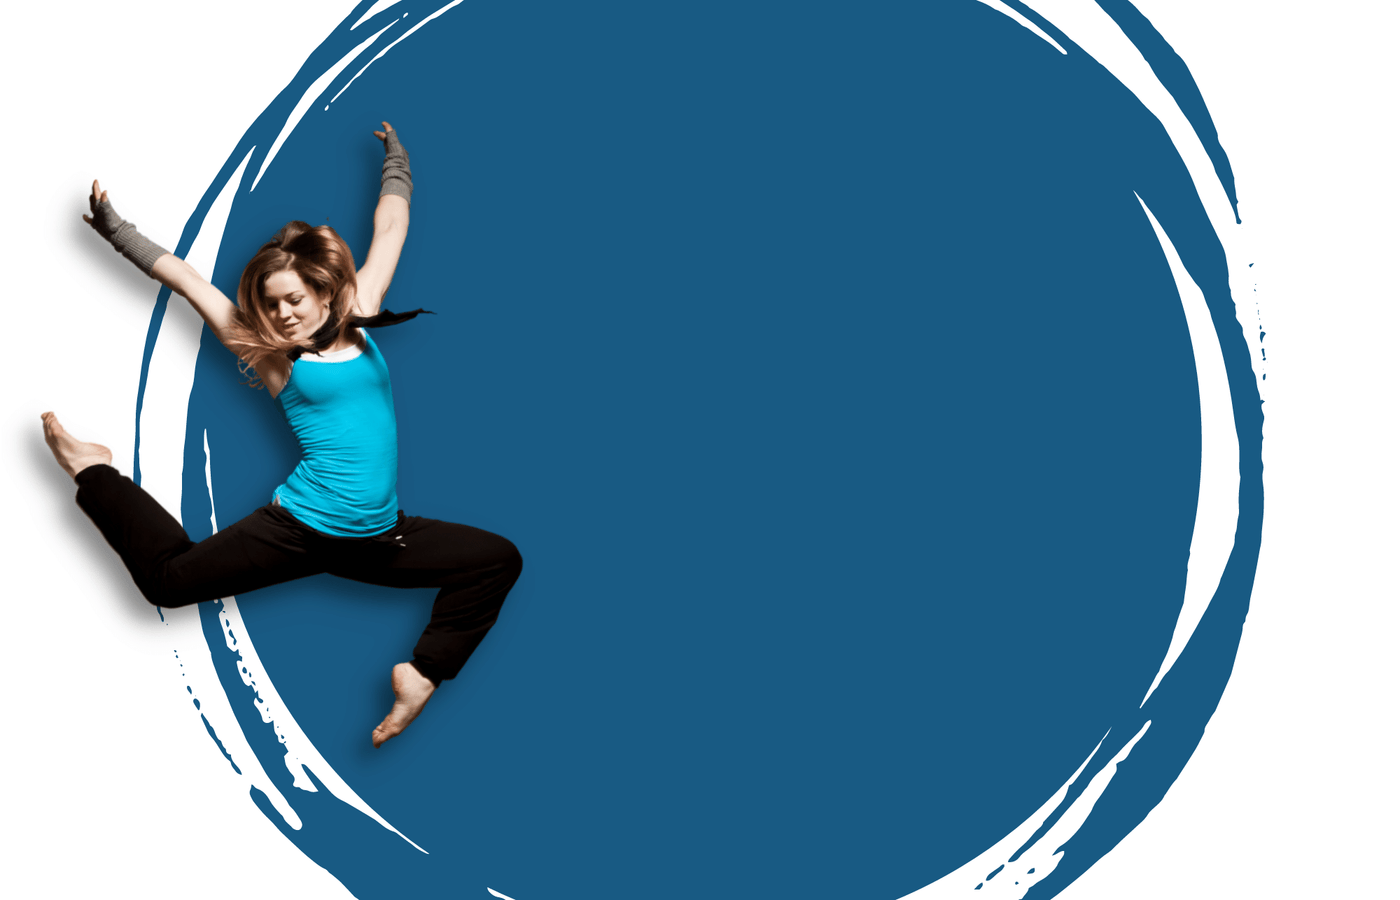 A teen female dancer, wearing black pants, bright teal top, grey fingerless gloves. She is jumping with both legs bent and arms up high..The background has a light blue/grey large paint splat over a light grey backdrop.